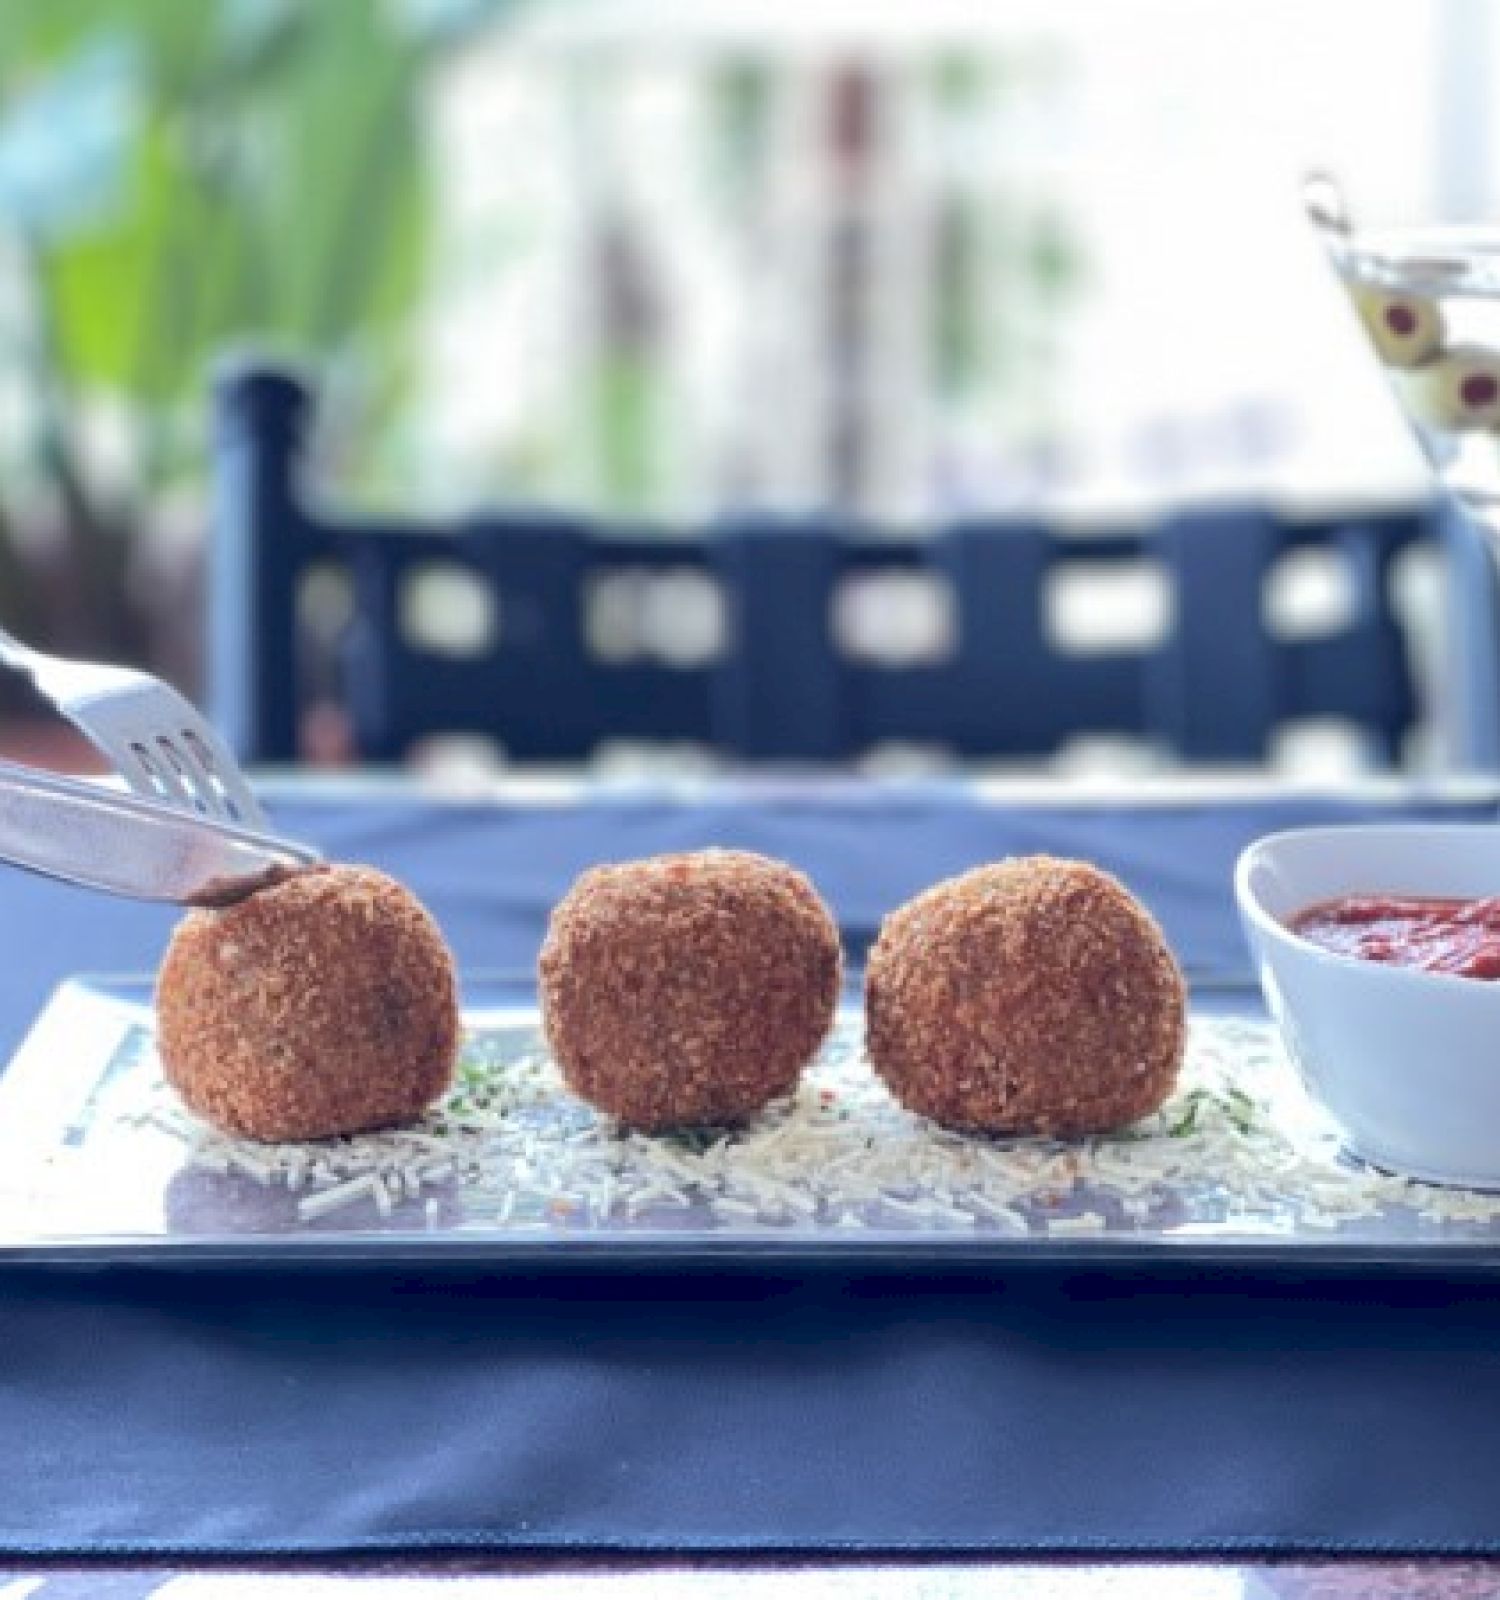 Three breaded balls on a plate with a dipping sauce and a drink garnished with olives. A hand is cutting one of the balls.